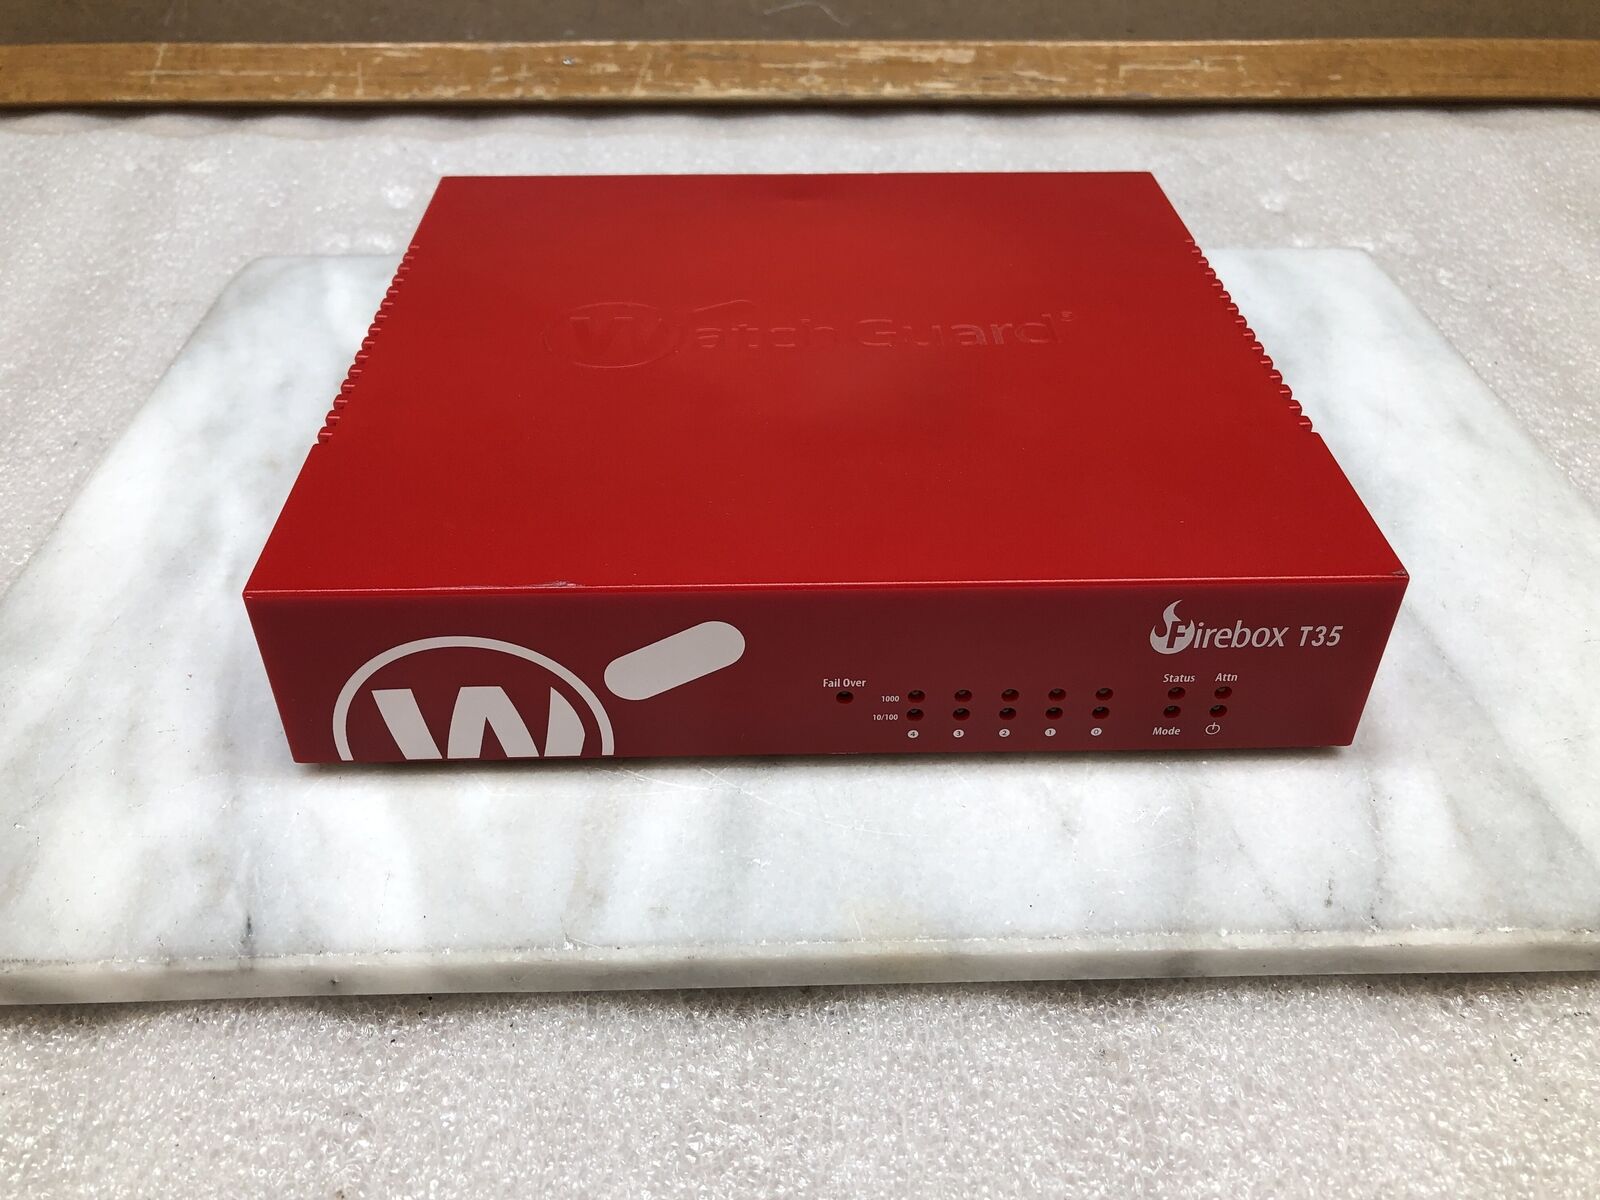 Watchguard Firebox T35 MS3AE5 Network Security Firewall Appliance TESTED